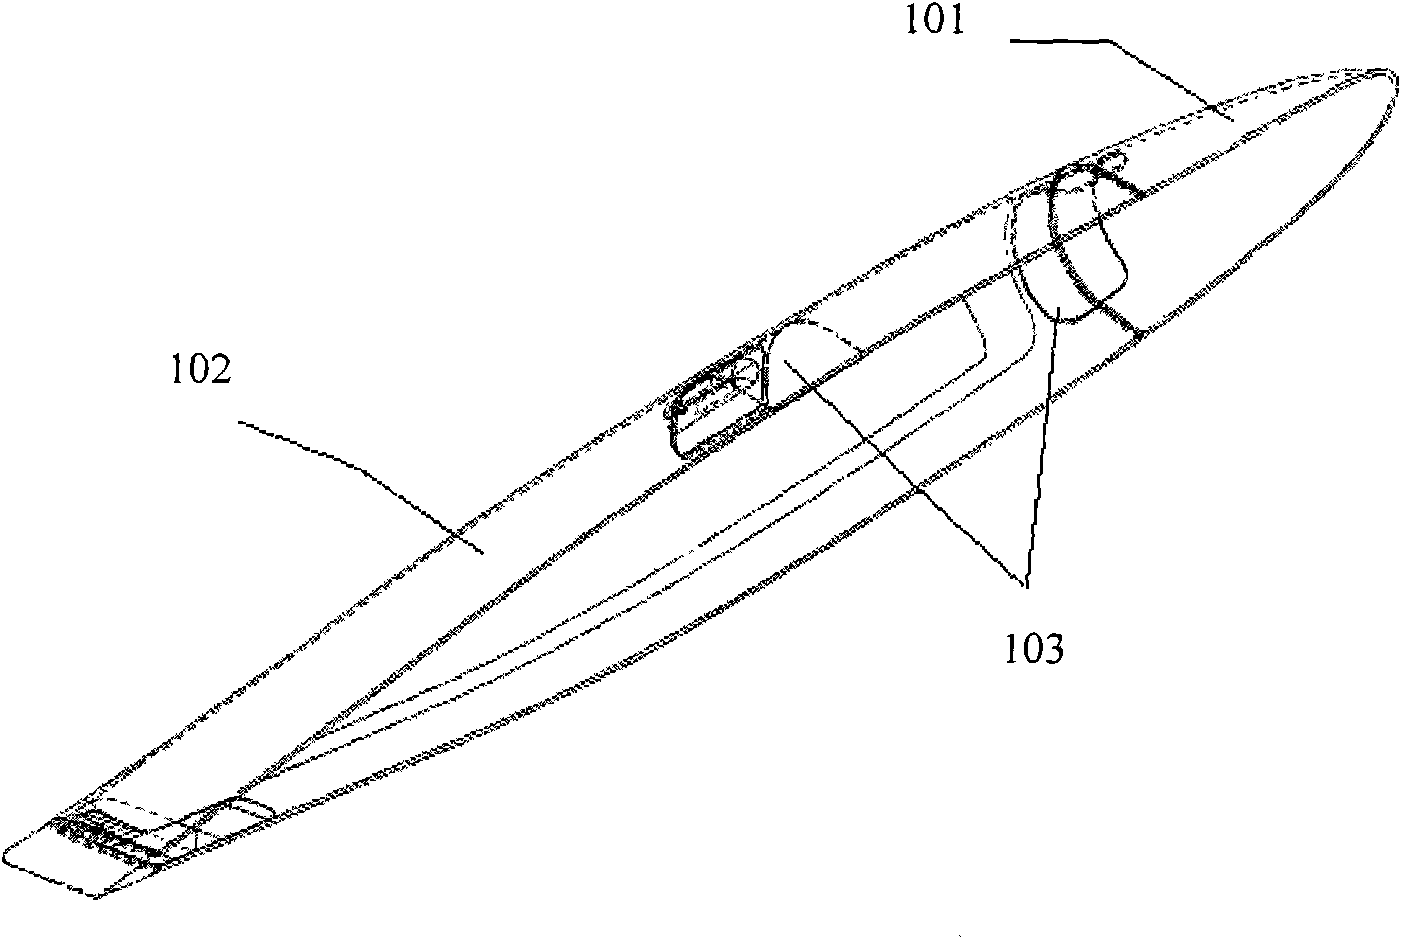 Wingtip cover mirror face part drawing processing method